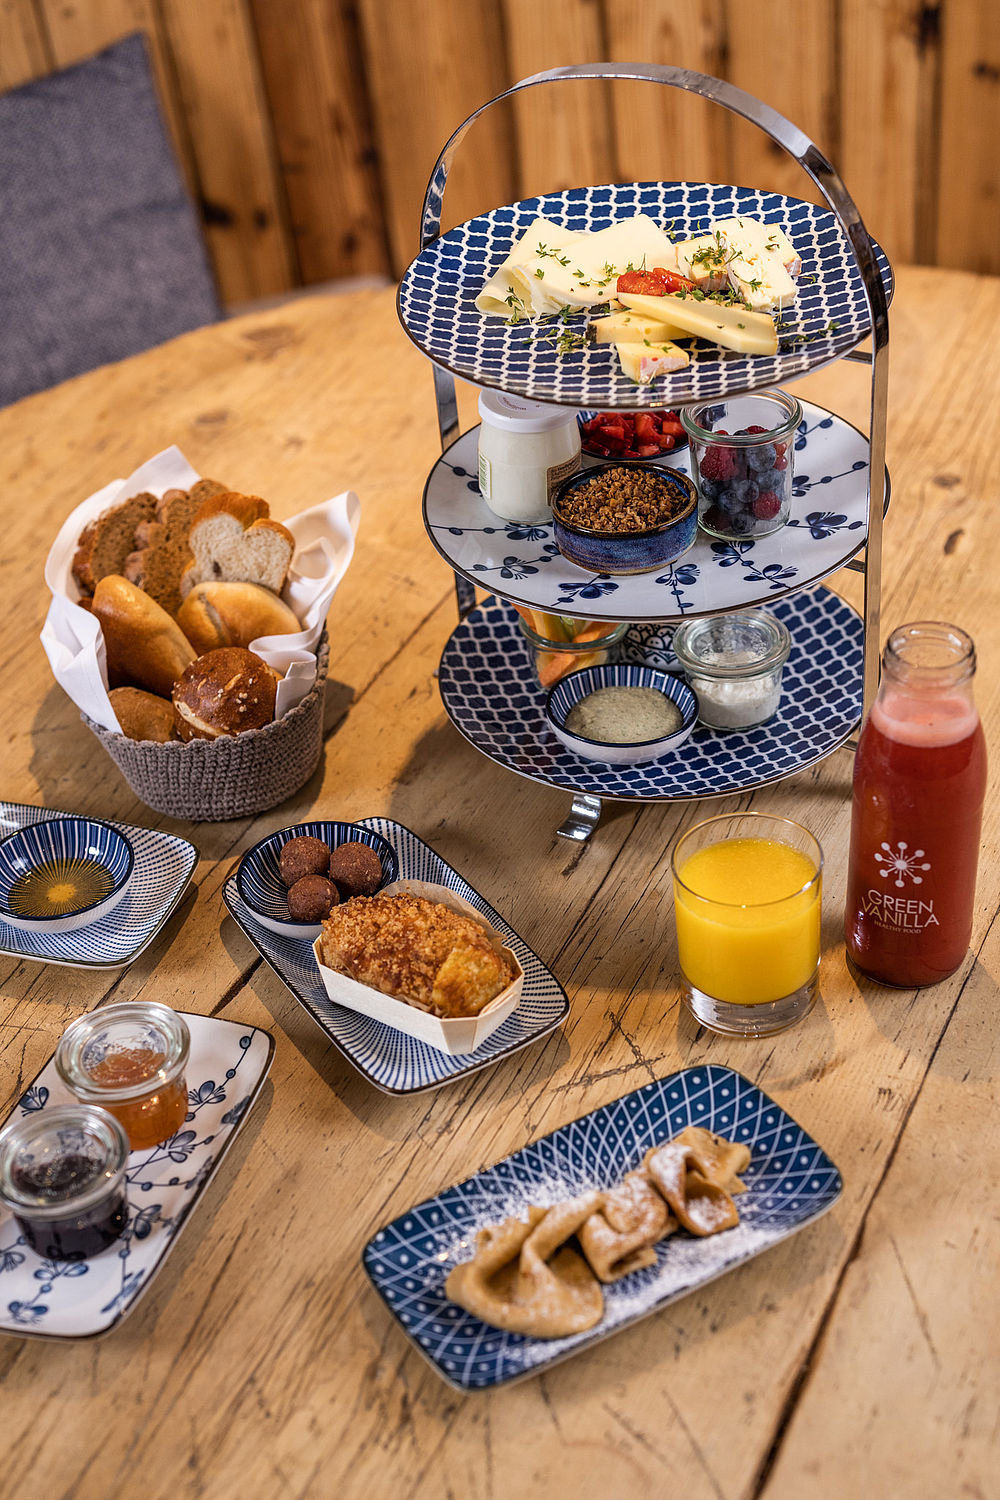 Breakfast table with fresh juices, a cake stand with different types of cheese, muesli, fresh fruit and various baked goods